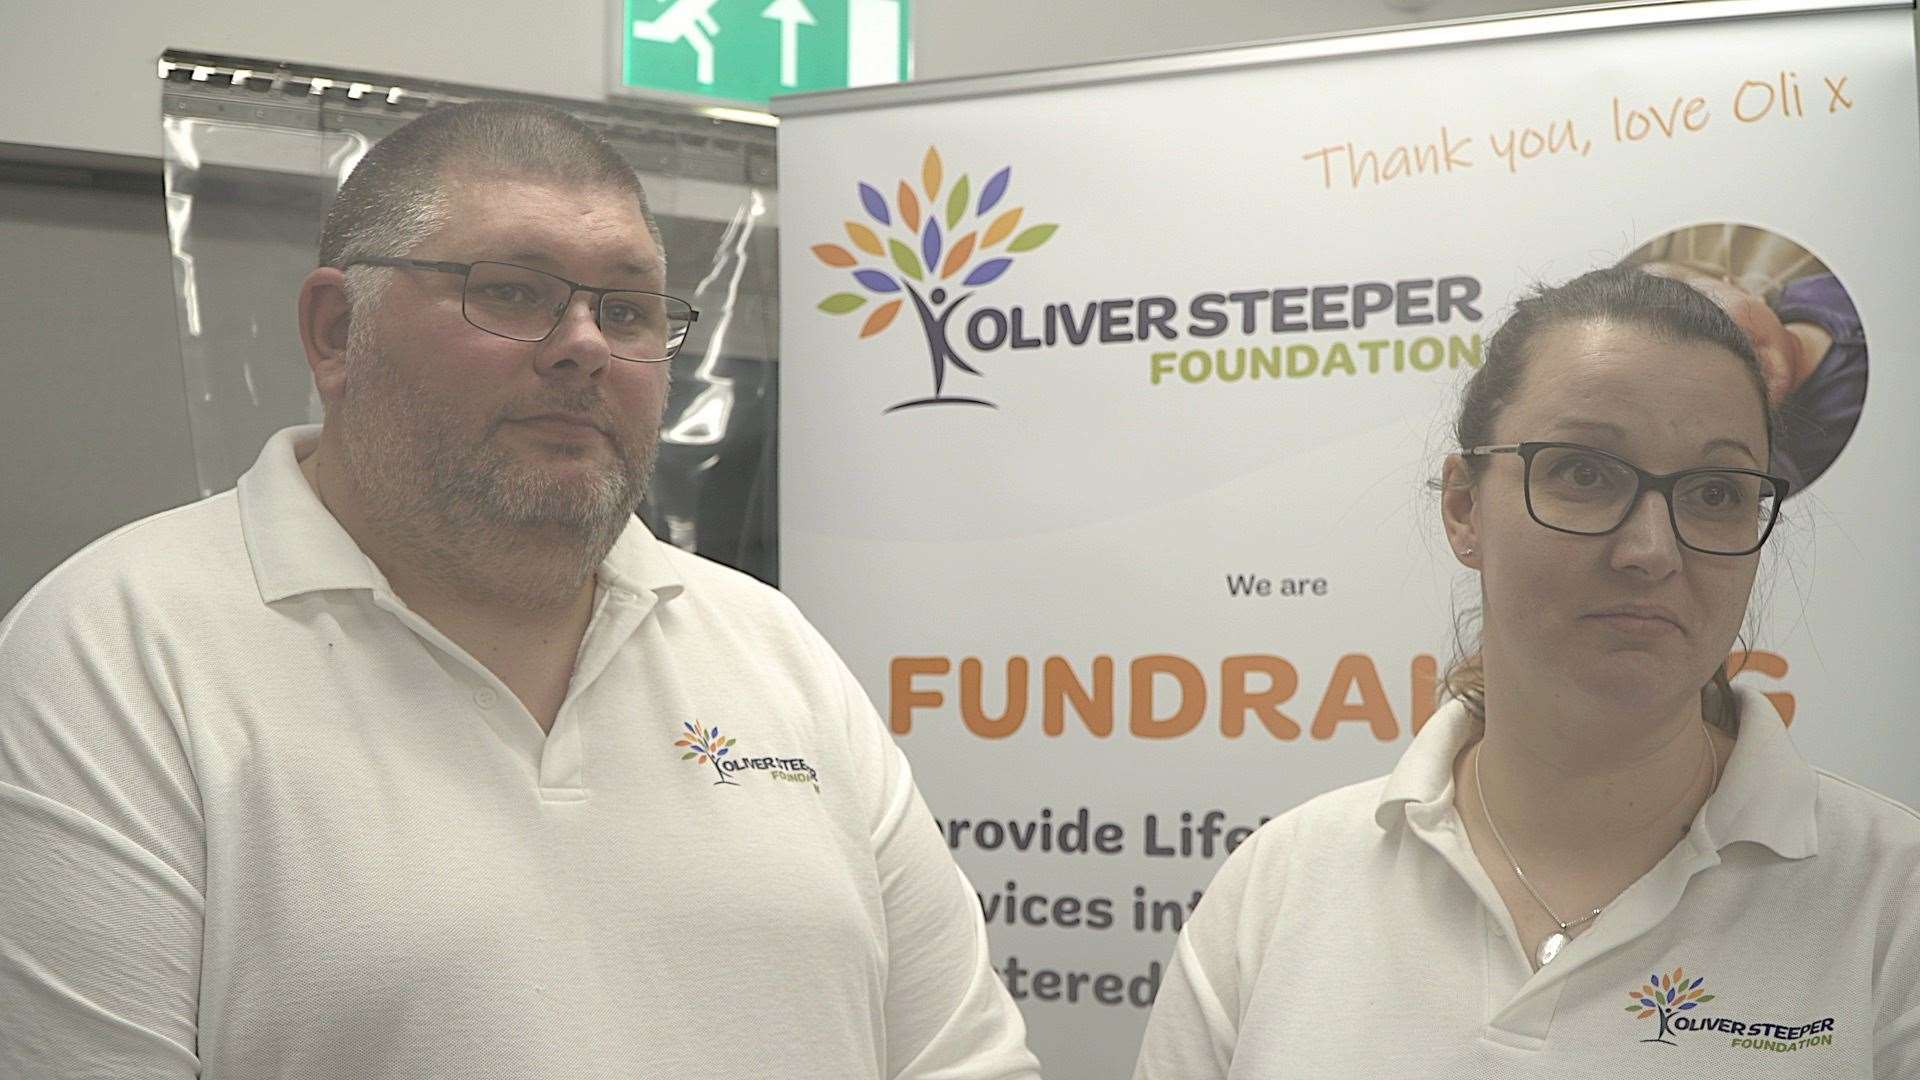 Lewis and Zoe Steeper set up the Oliver Steeper Foundation in honour of their son who passed away after his windpipe became blocked while he was at daycare in Ashford in September 2021